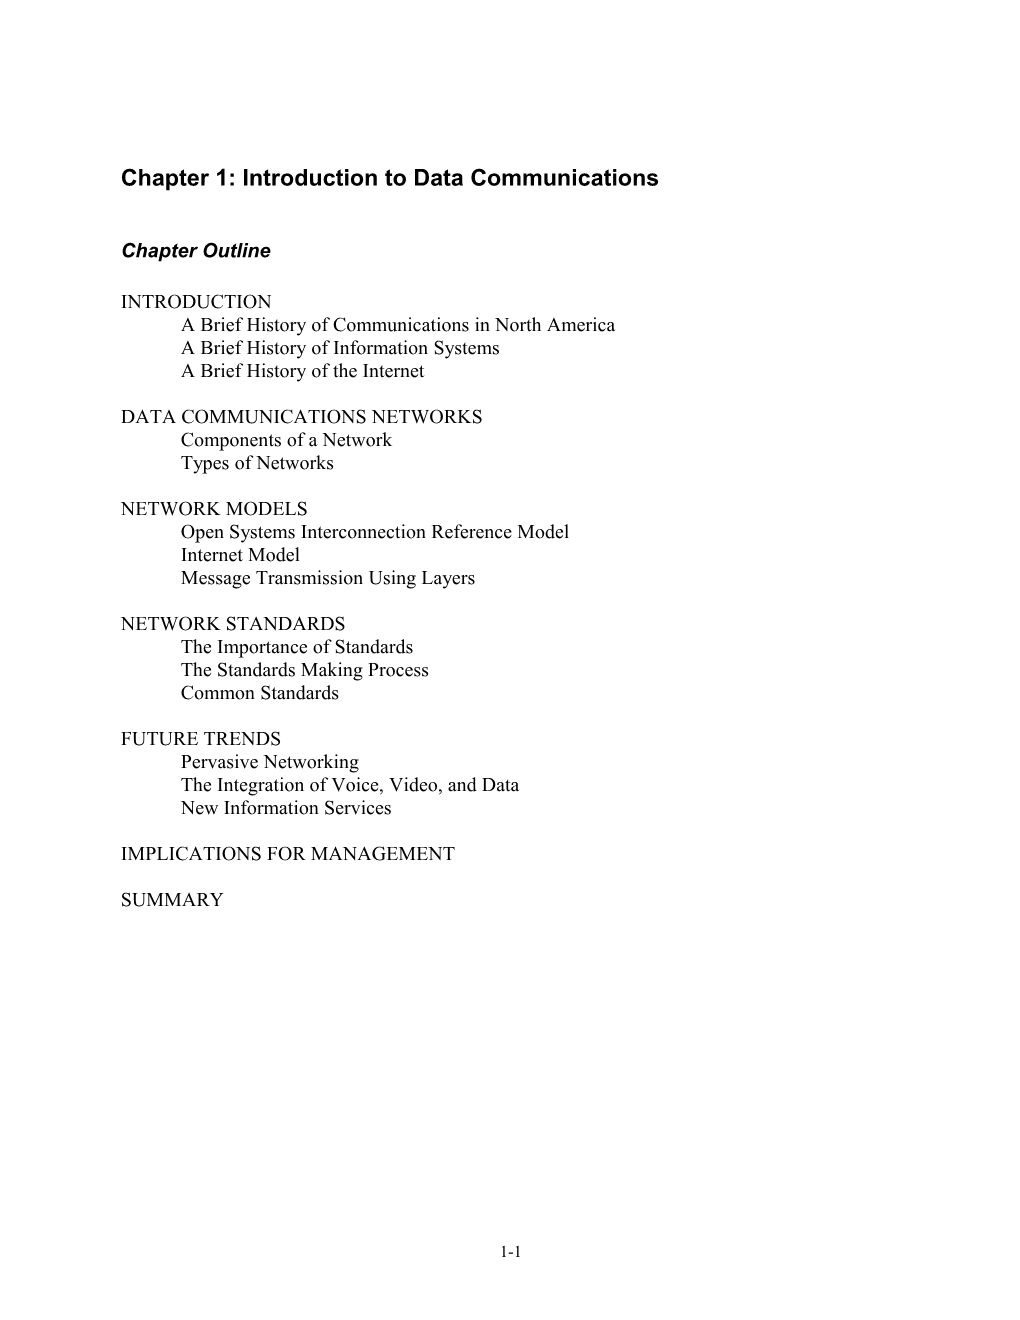 Chapter 1: INTRODUCTION to DATA COMMUNICATIONS